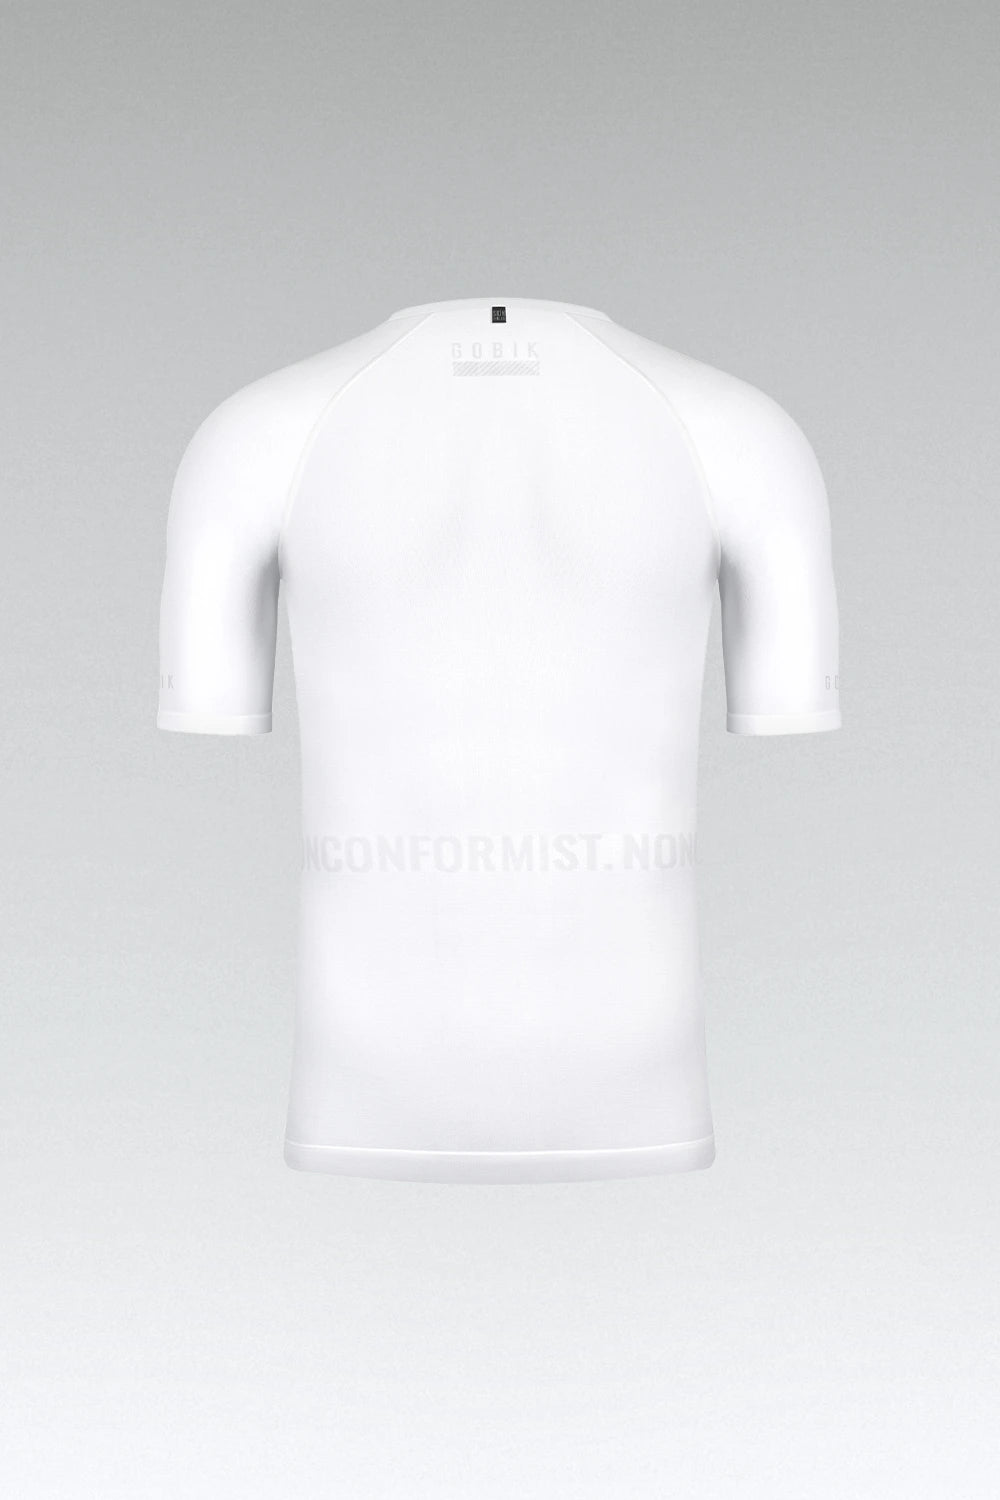 SOUS MAILLOT MANCHES COURTES LIMBER SKIN HOMME ICELANDIC